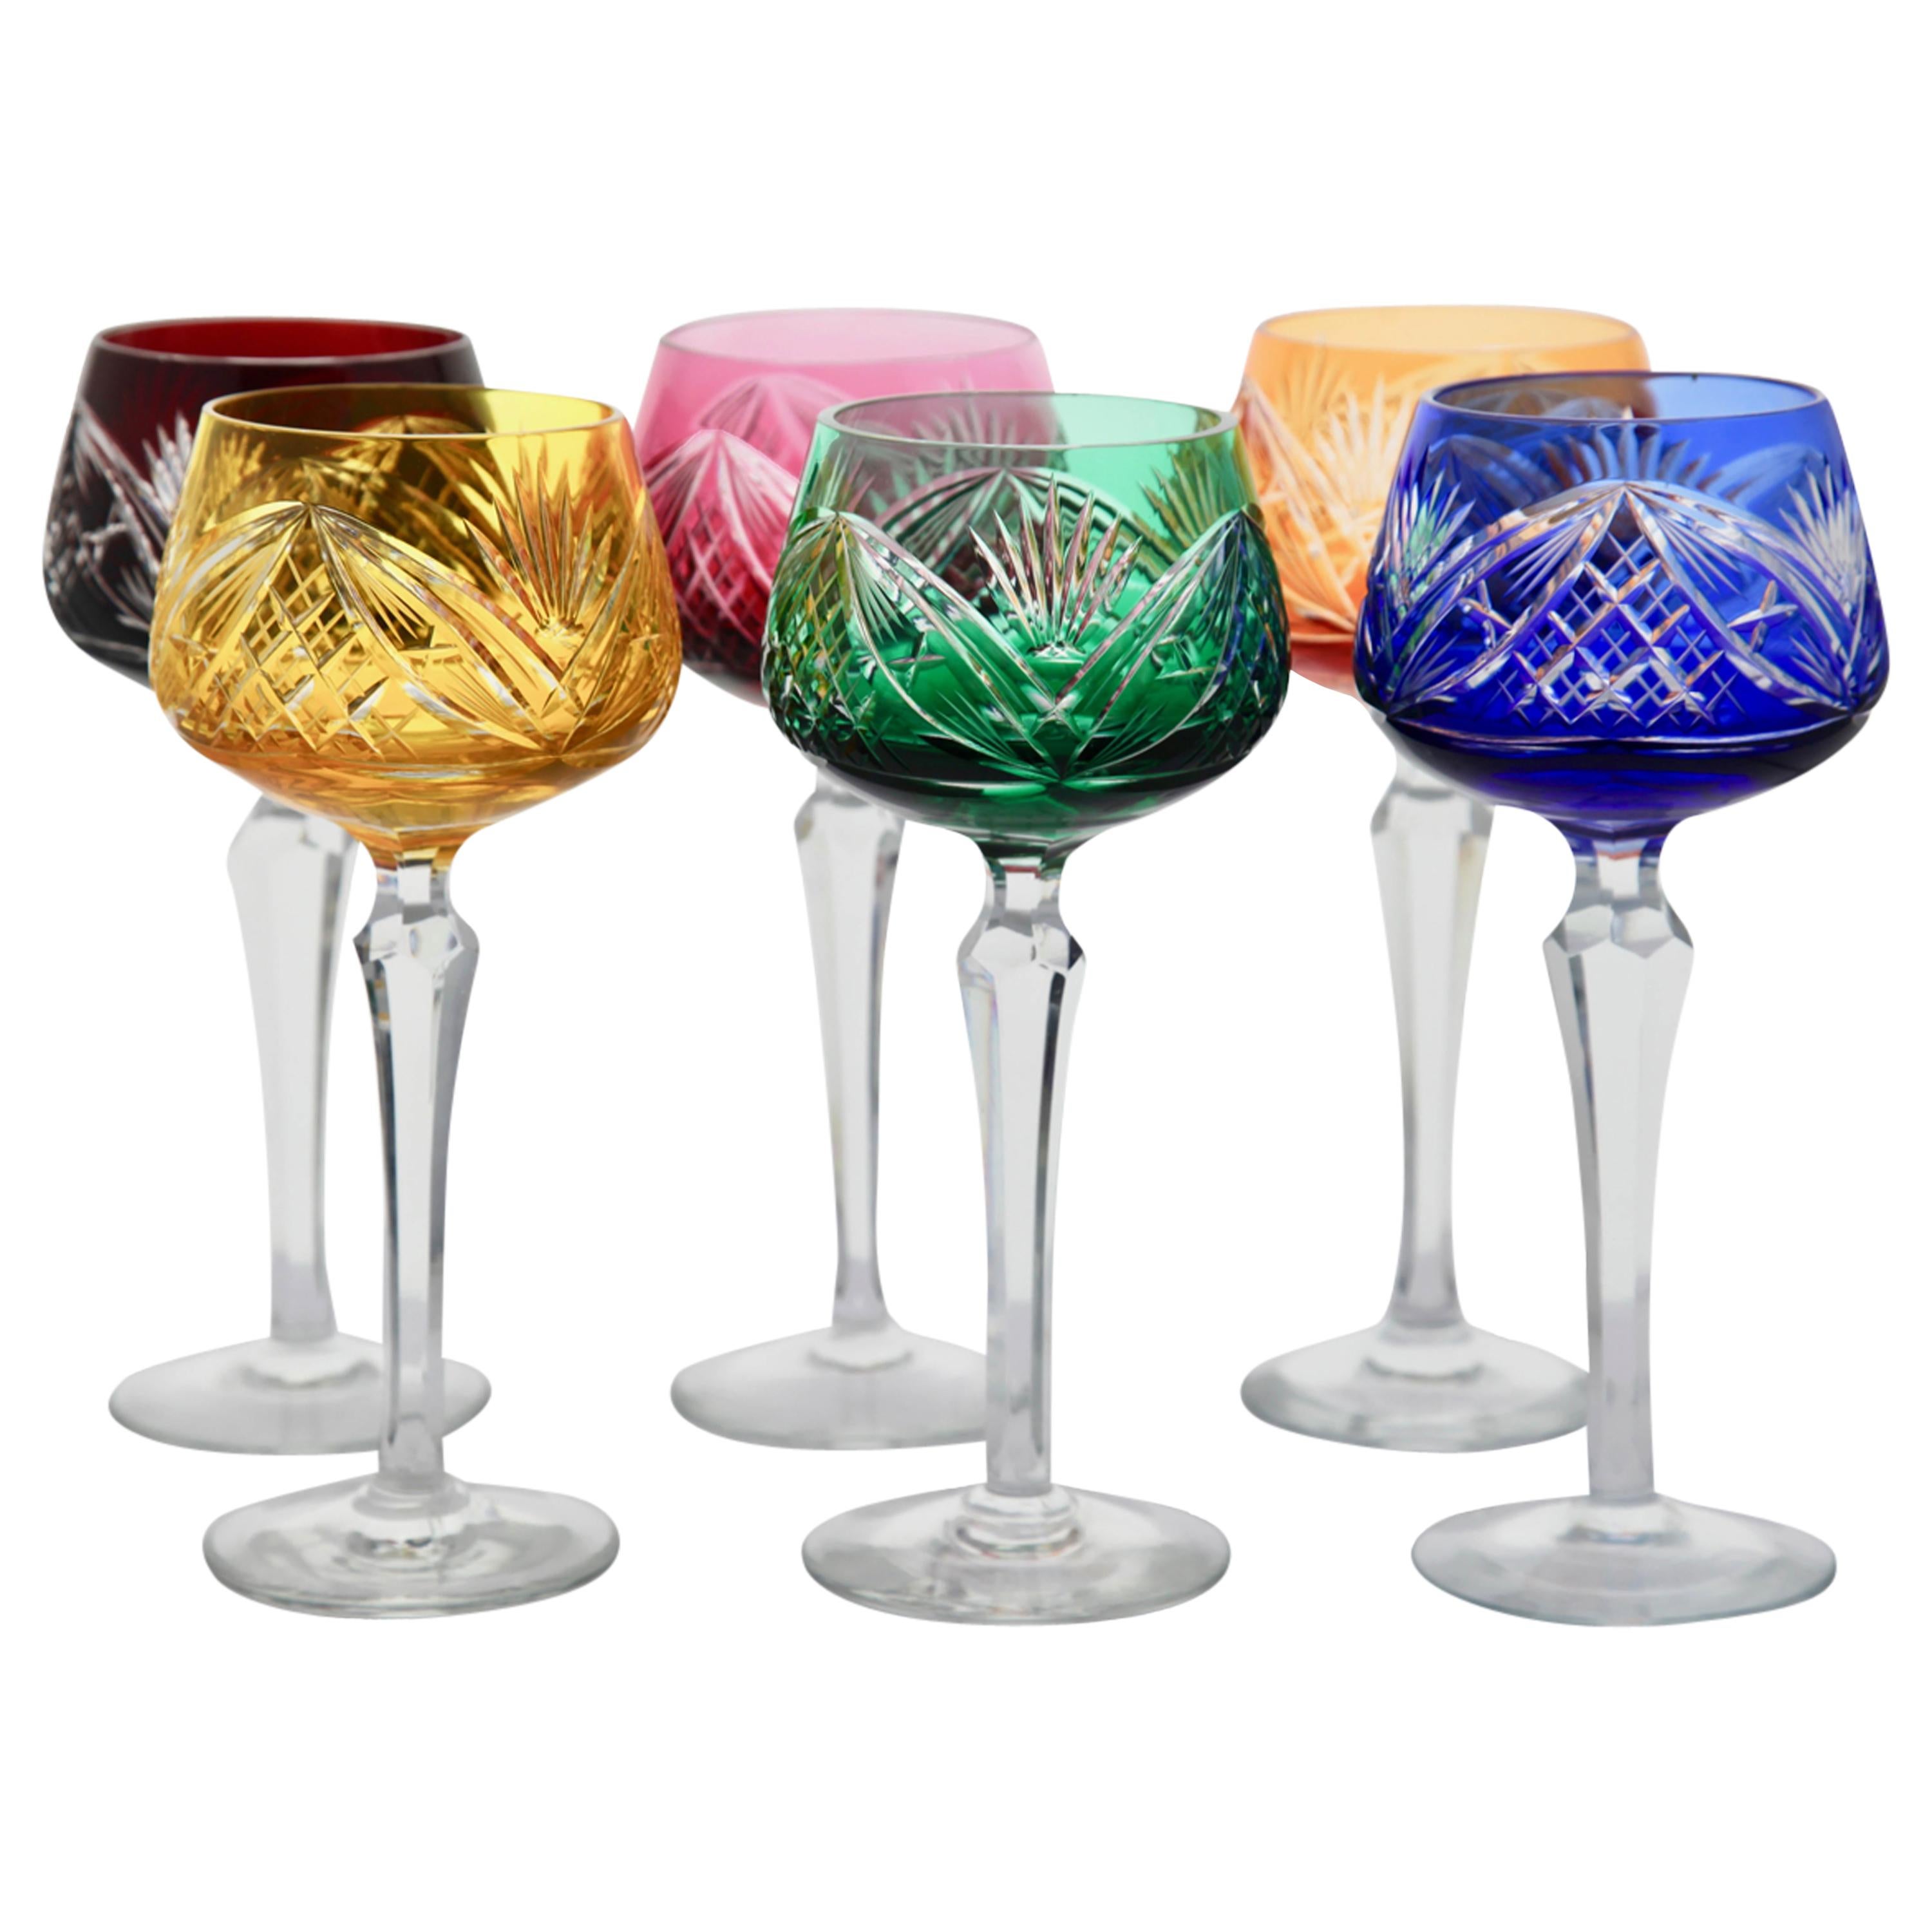 https://a.1stdibscdn.com/crystal-set-of-6-nachtmann-stem-glasses-with-overlay-cut-to-clear-for-sale/1121189/f_211350821603751615095/21135082_master.jpg